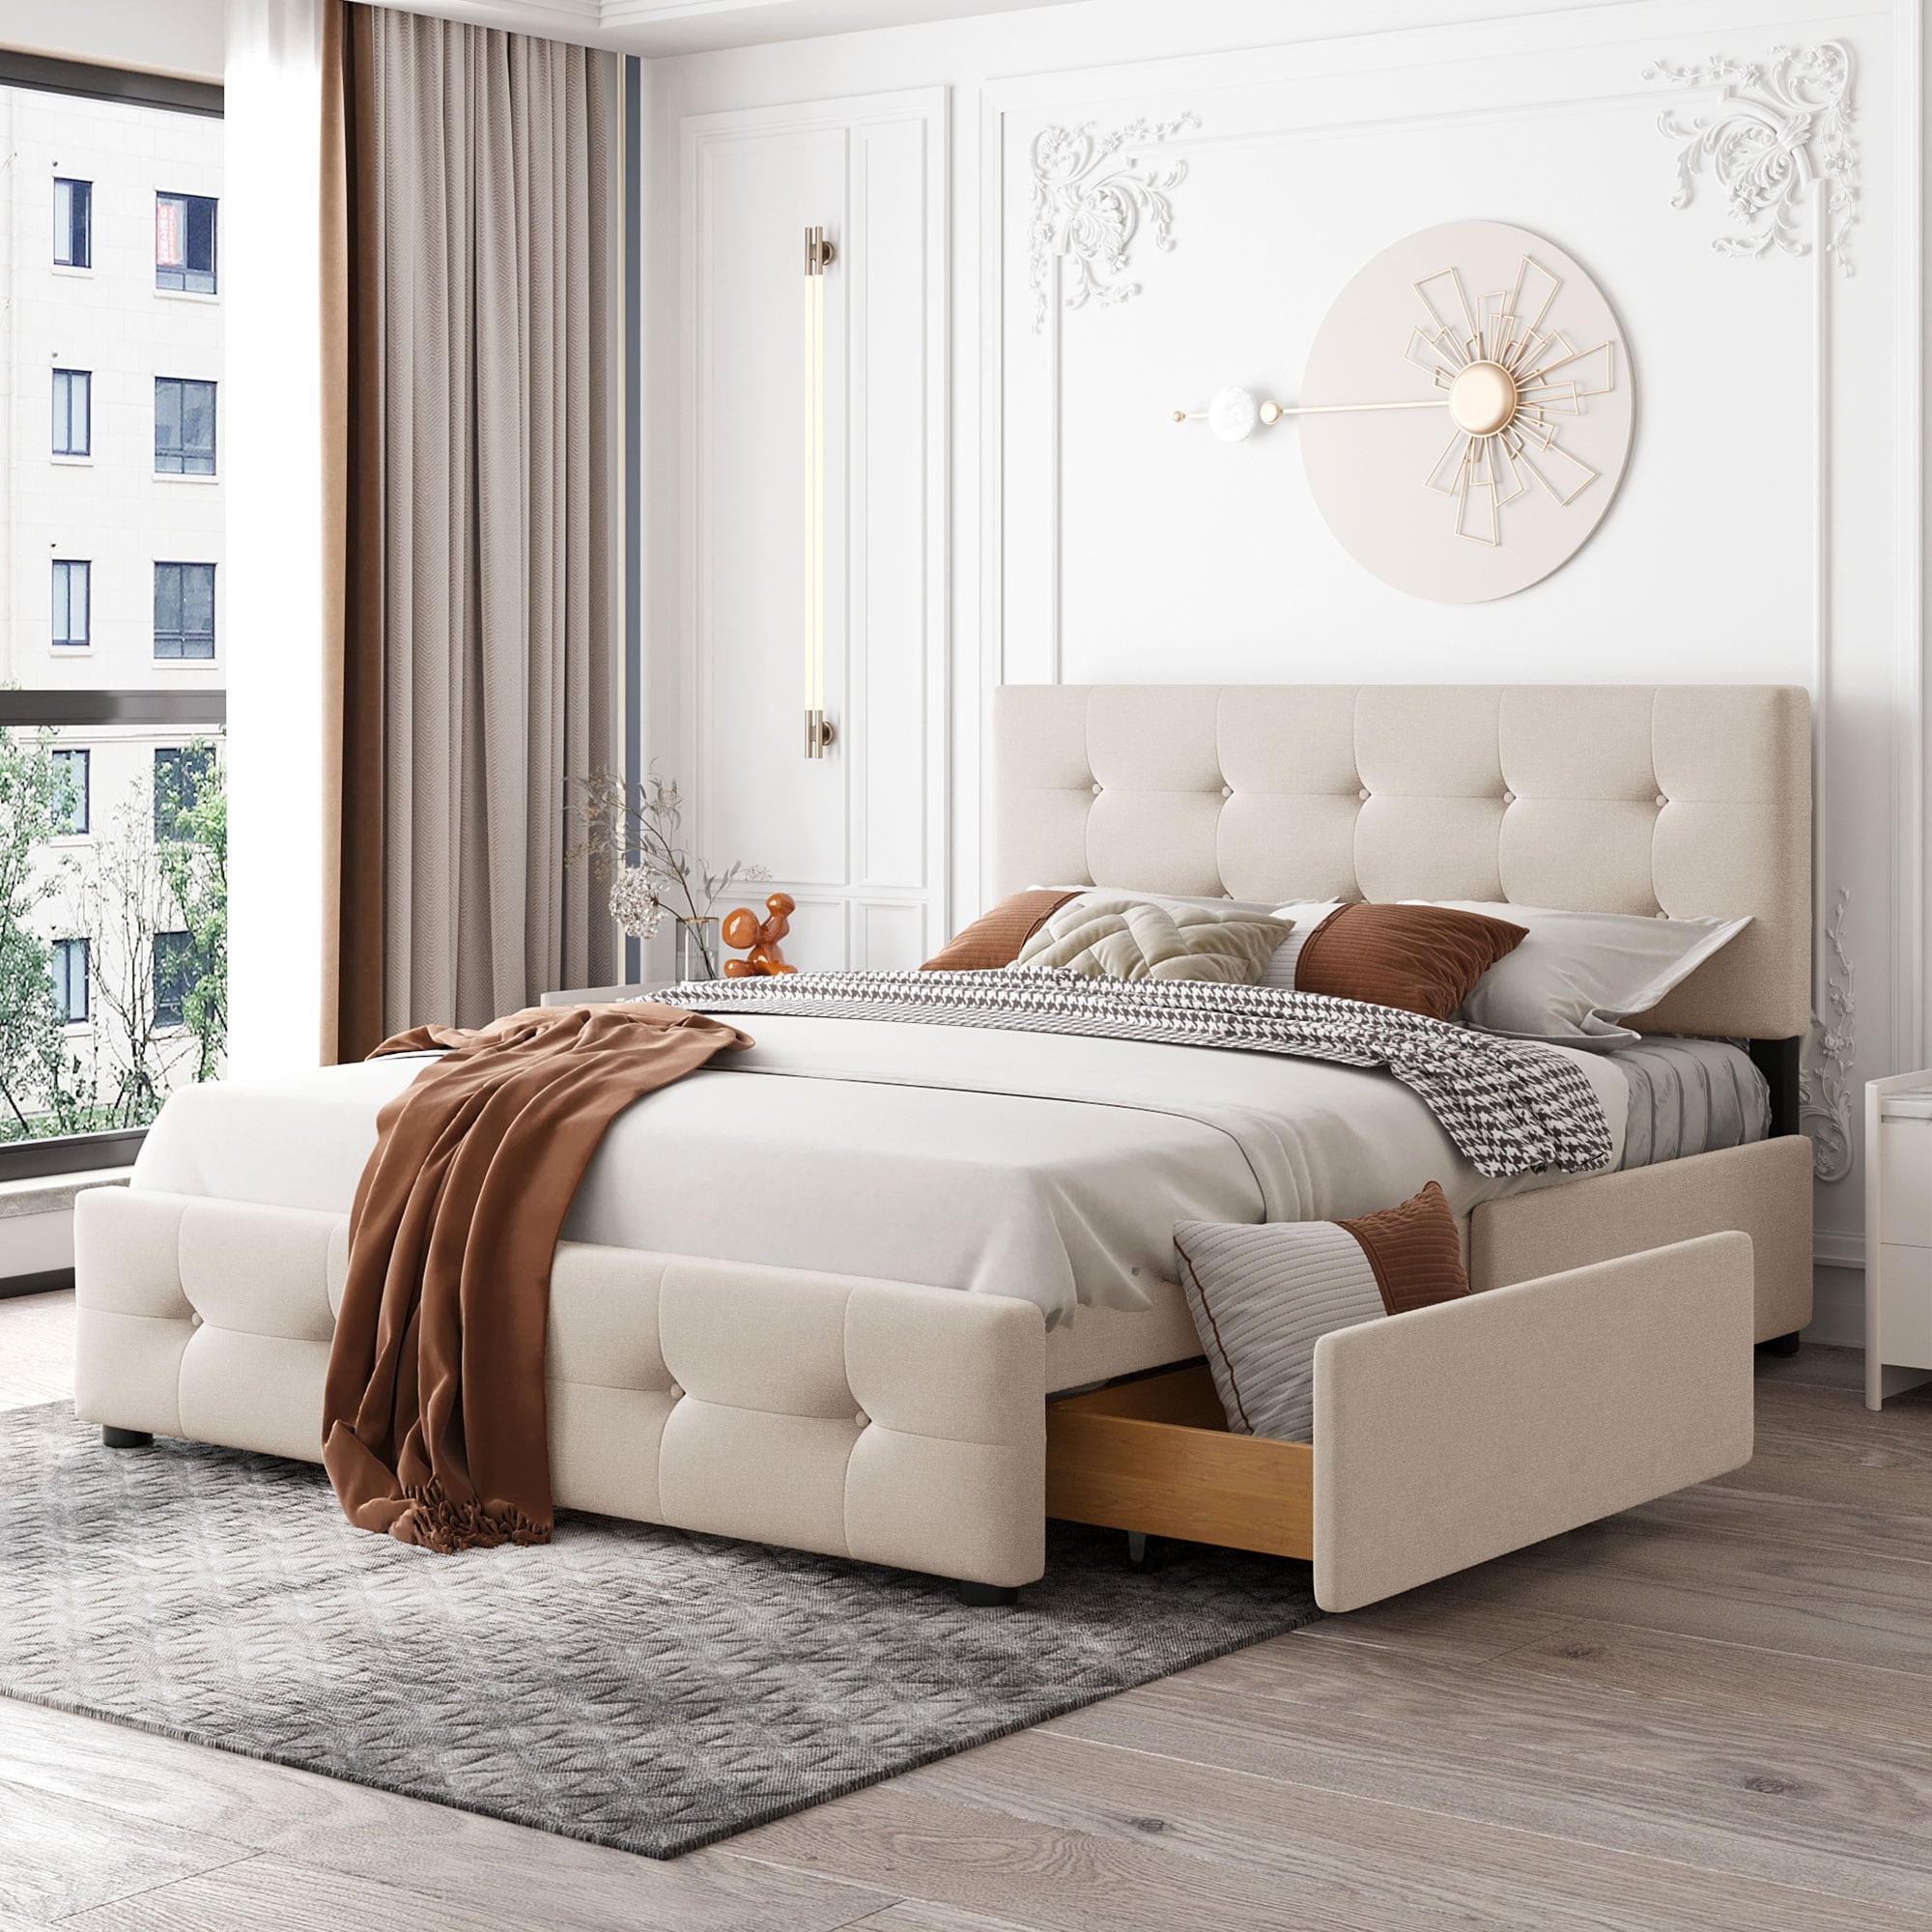 https://ak1.ostkcdn.com/images/products/is/images/direct/e3b857888225abf608f5f92ca58771423c594062/Upholstered-Platform-Bed-Queen-Size-Linen-Storage-Bed-with-Headboard-and-4-Drawers.jpg